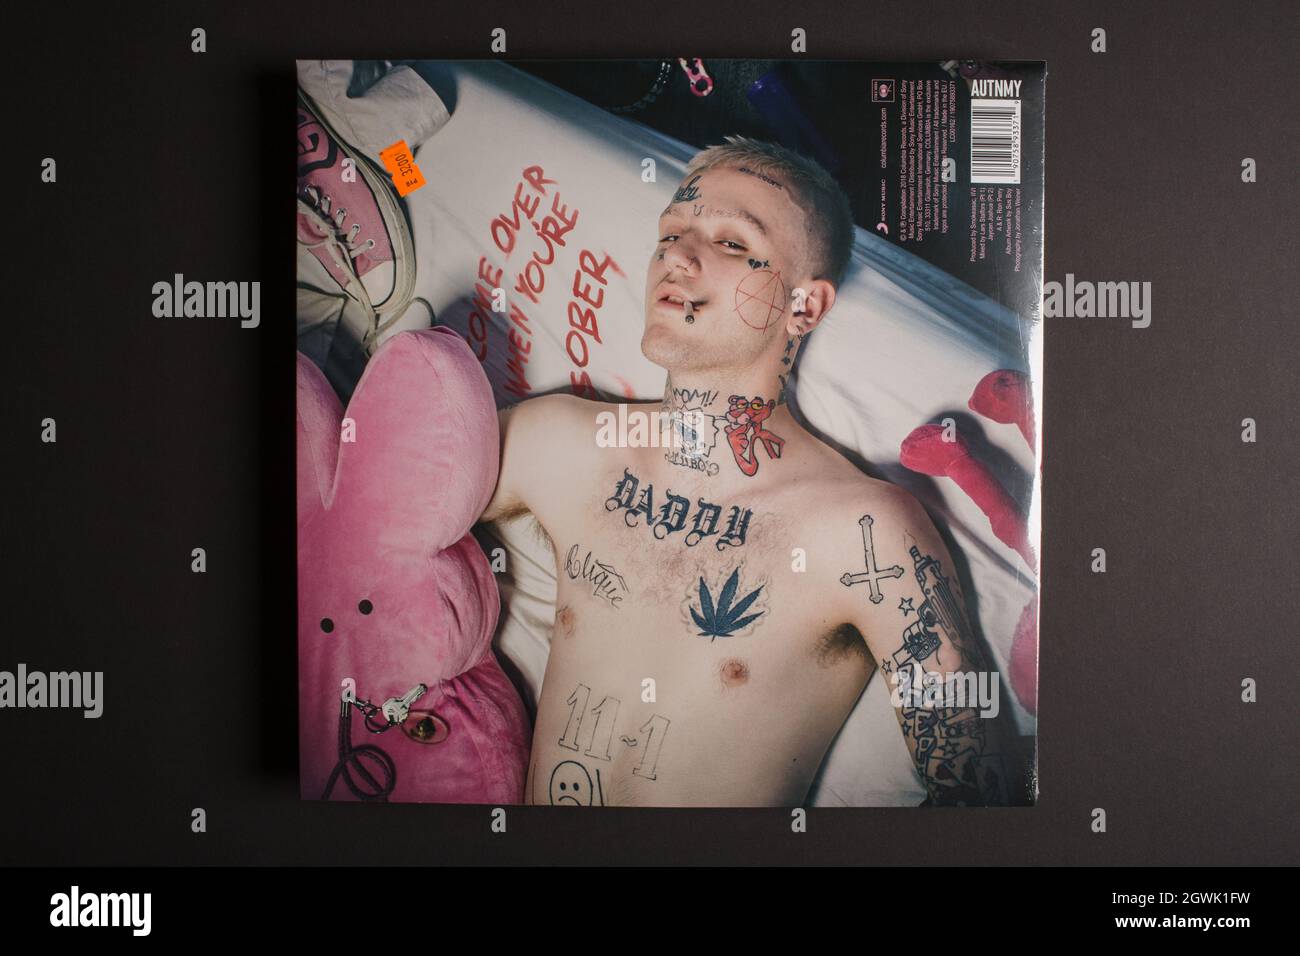 Moscow, Russia - October 3, 2021: Deluxe 2 LP edition of the album of american rapper Lil Peep Come over when you're sober. Sealed vinyl record. Stock Photo